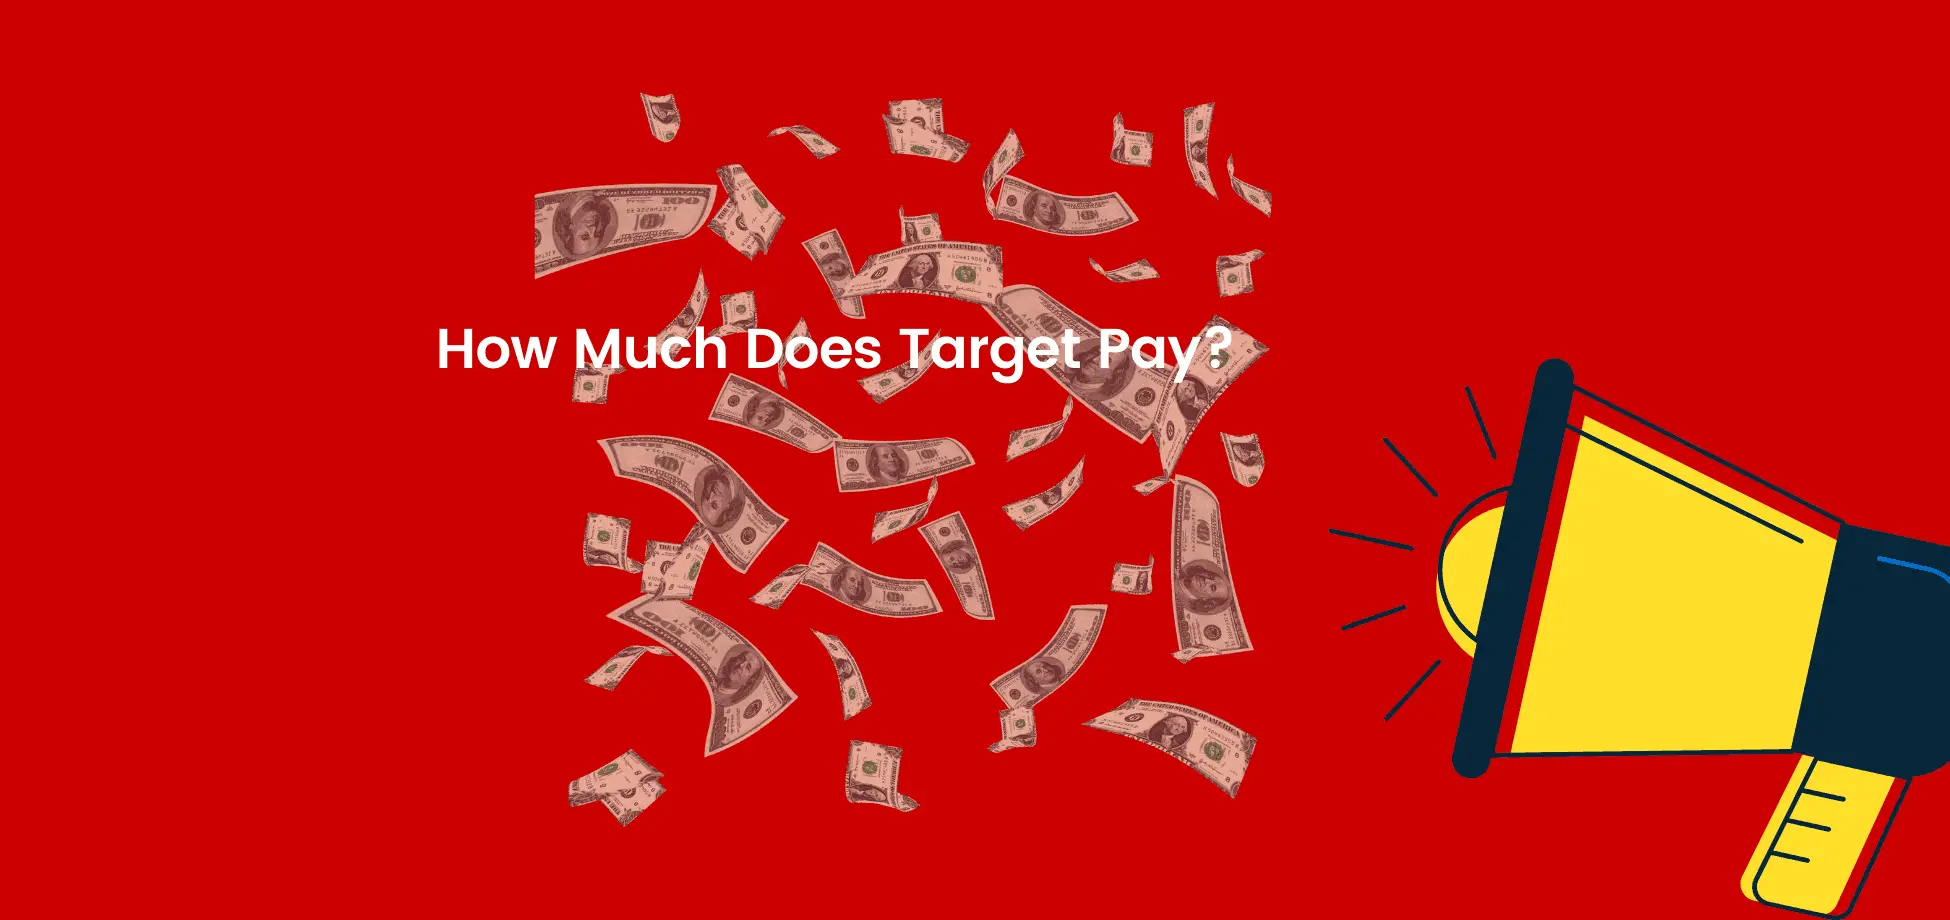 How much does target pay hourly and salaried workers? Here's the answer.